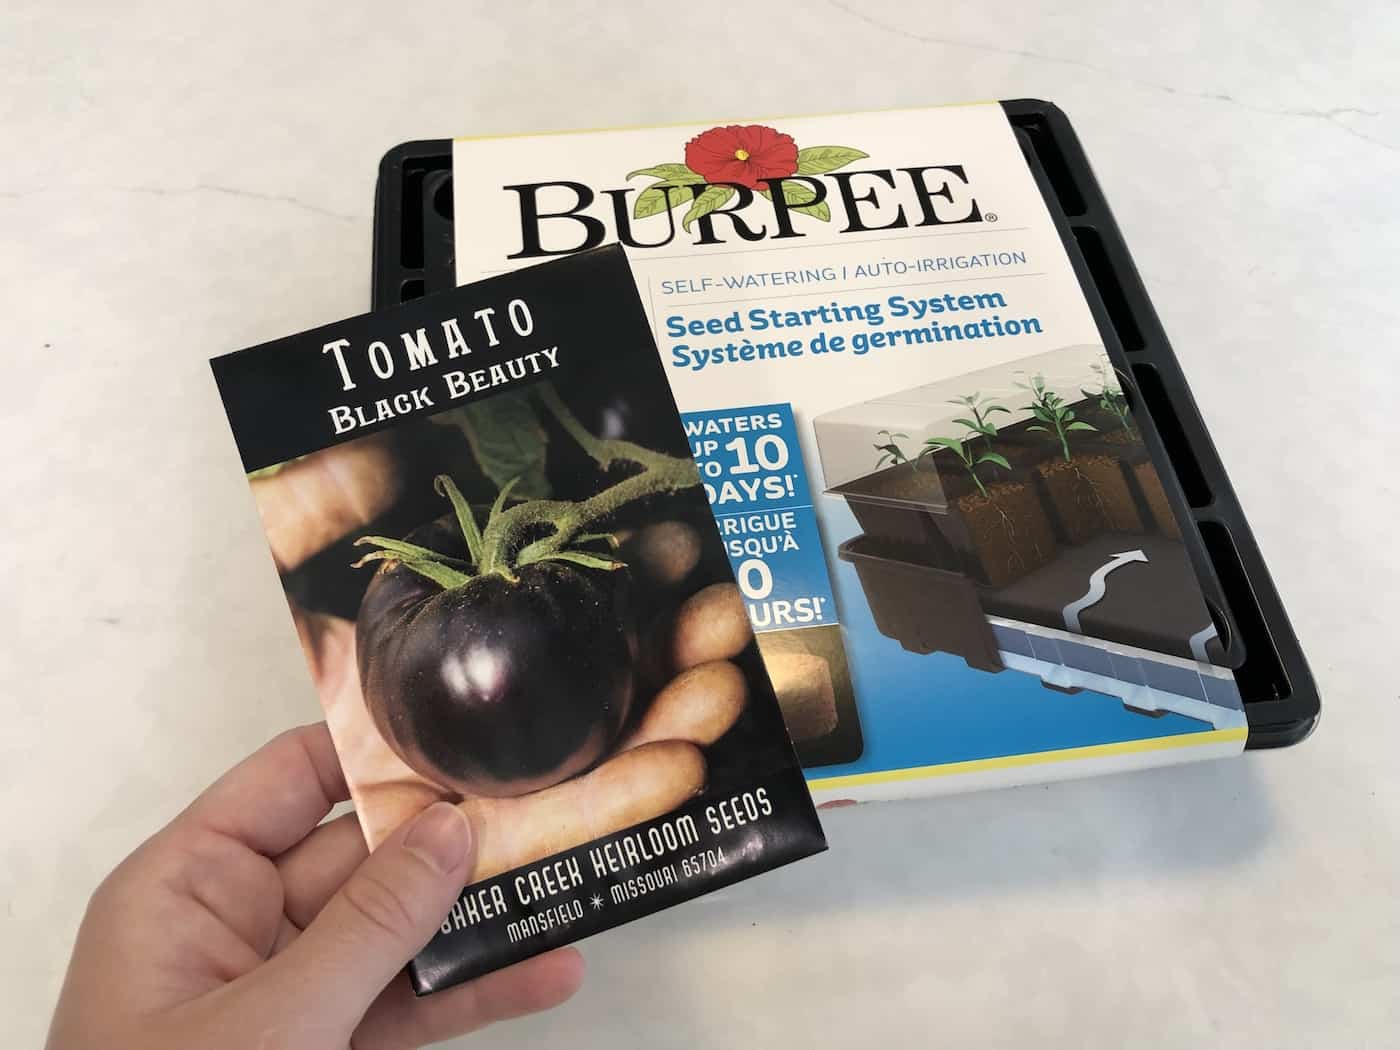 Planting tomato seeds - seed starting indoors